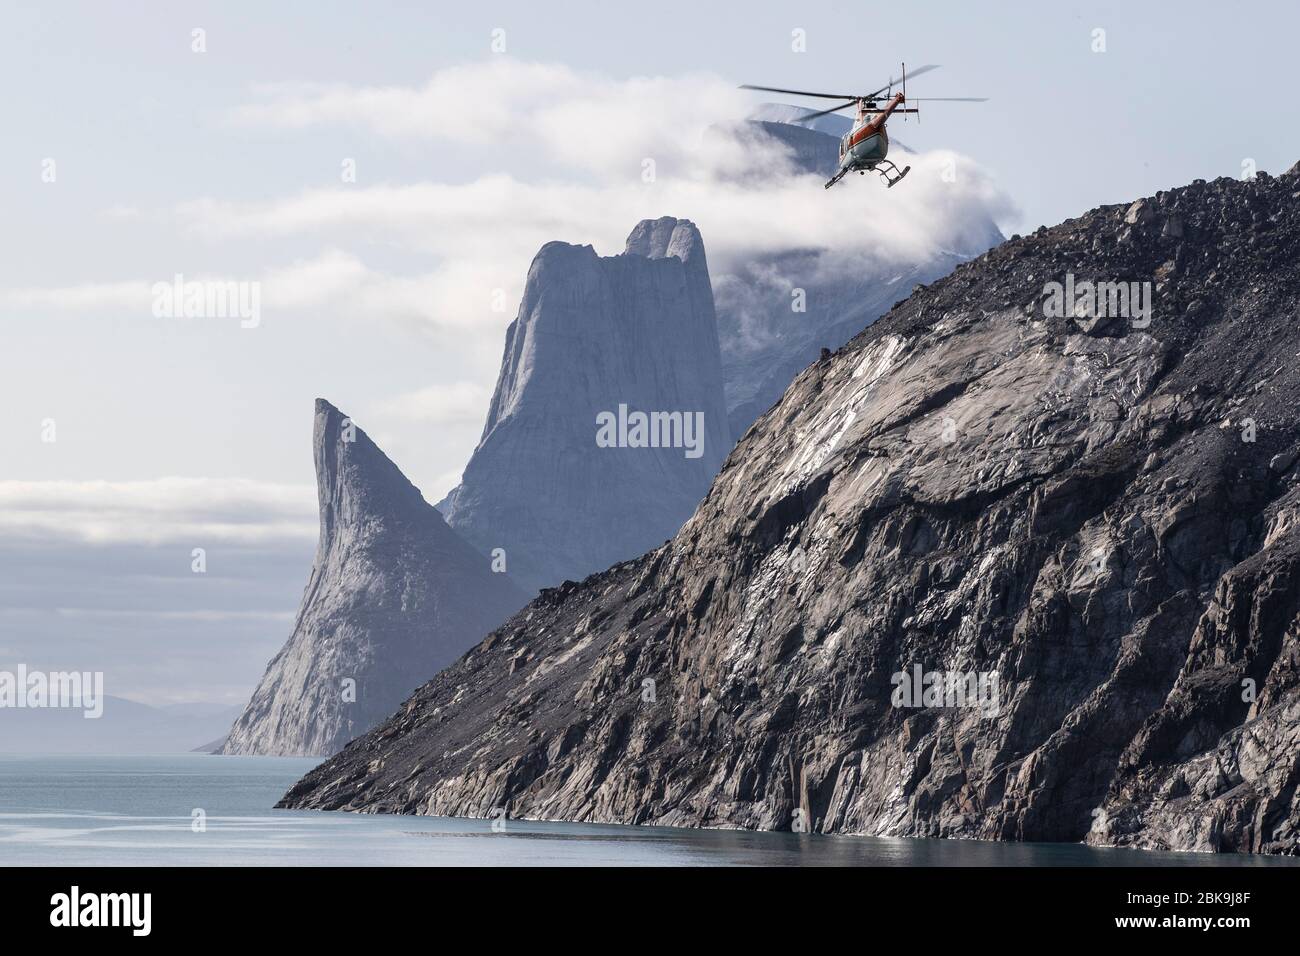 Helicopter and dramatic landscape, Sam Ford Fjord, Canada Stock Photo